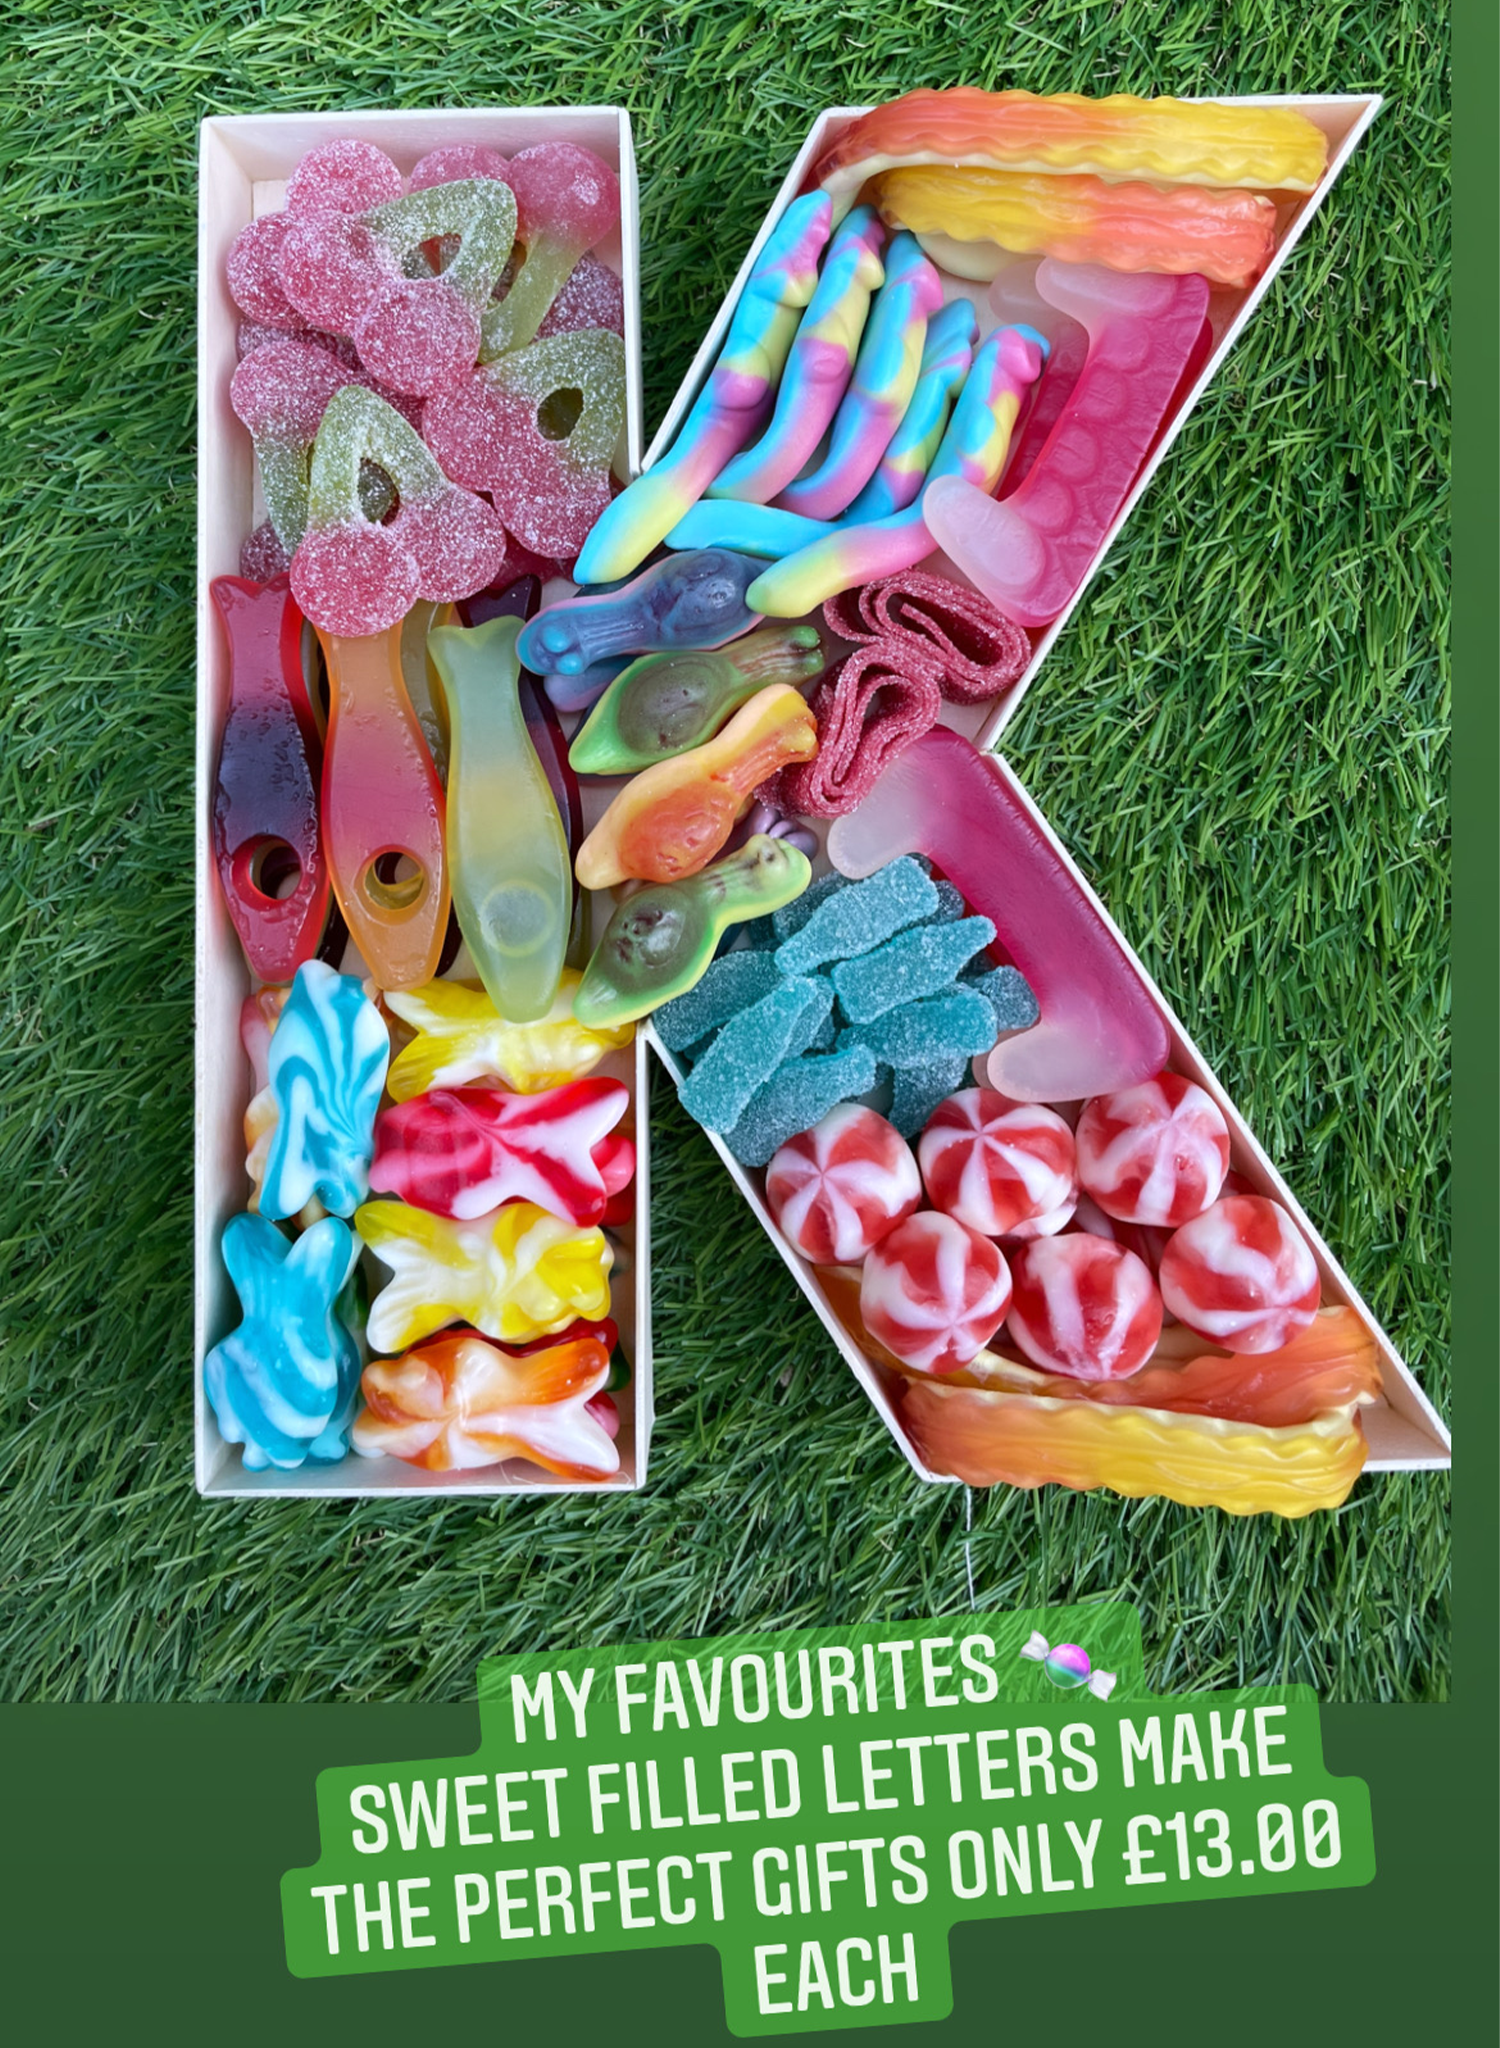 FILLABLE LETTERS🌟Pick and Mix Sweets ✓FOOD SAFE🌟Up To 20% OFF